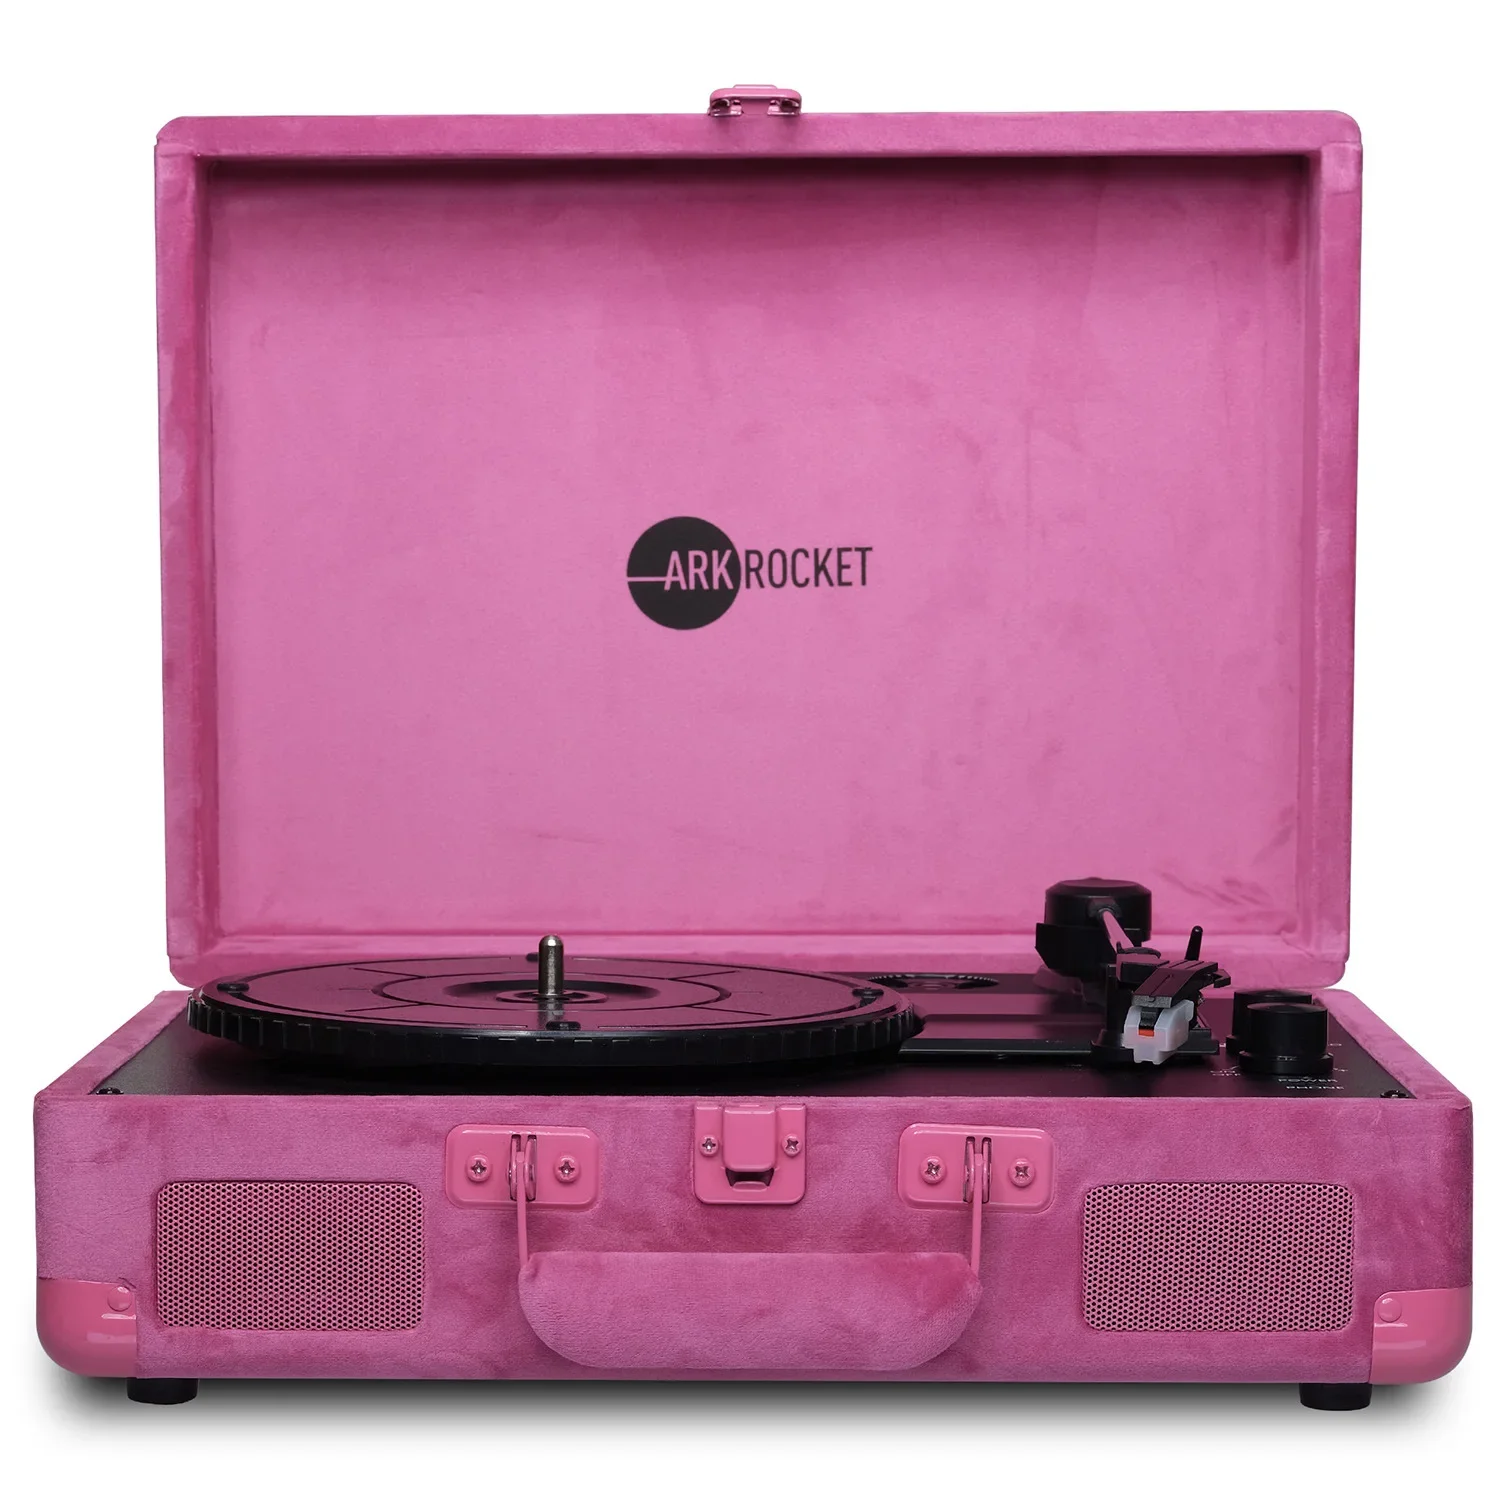 

Arkrockets Portable Handheld vinyl record player Retro all-in-one record player